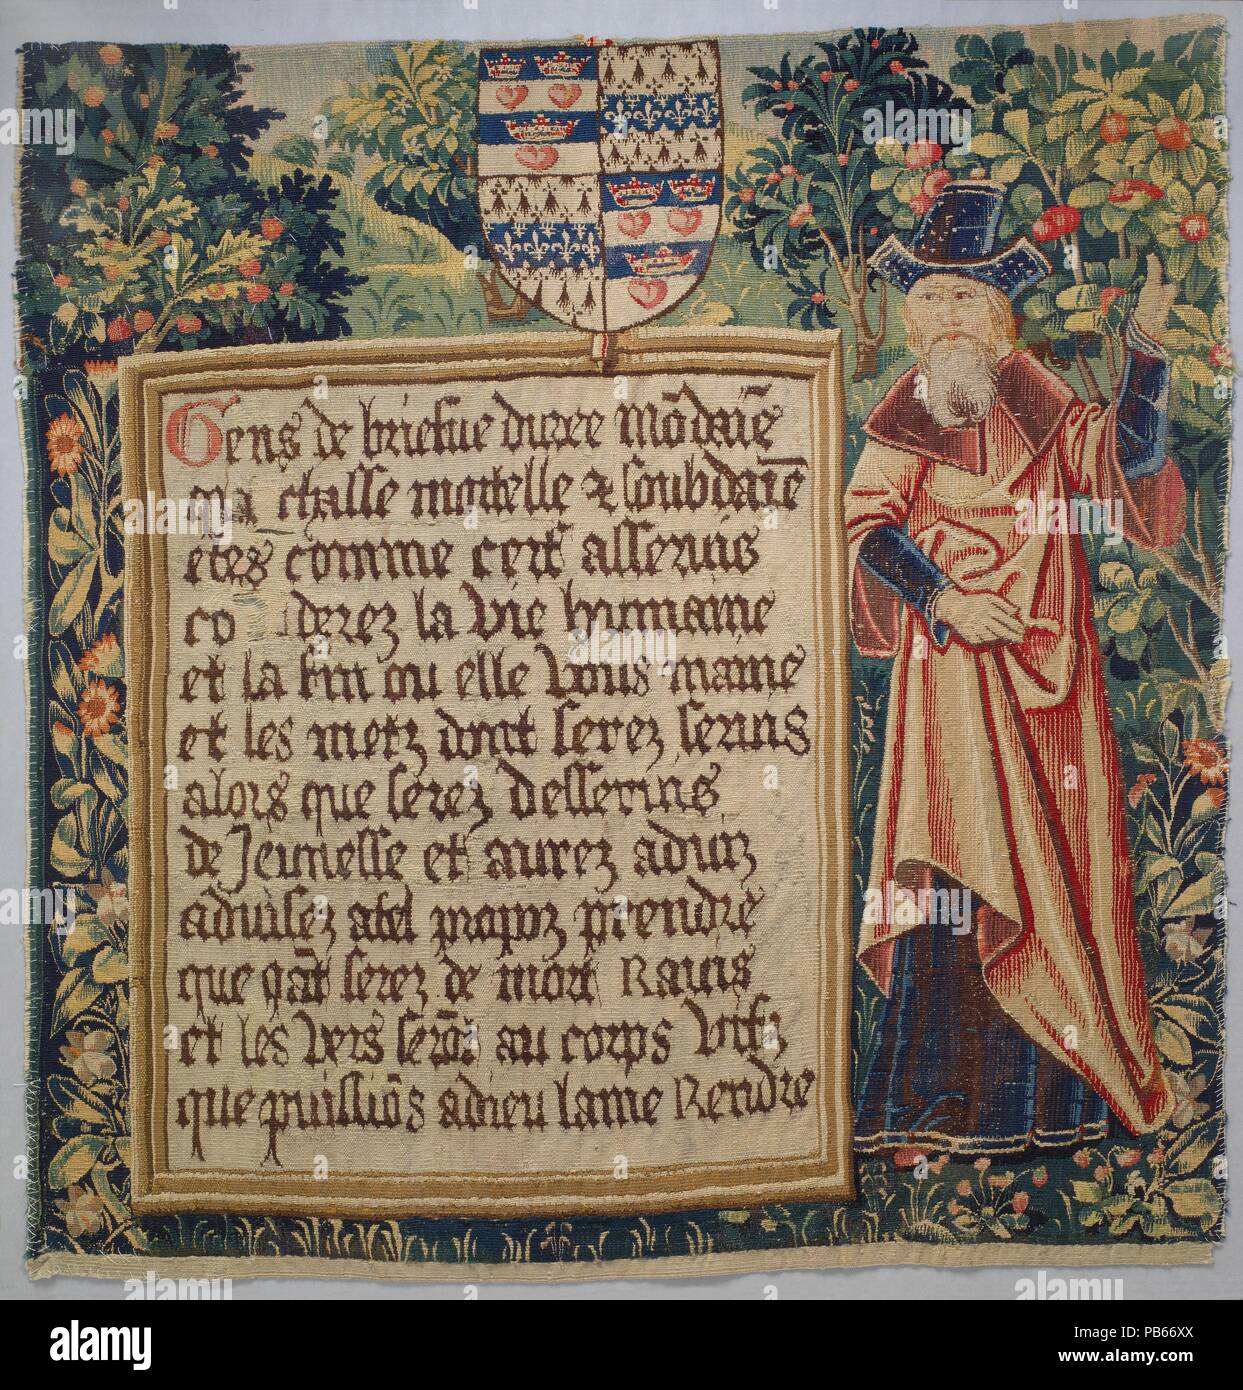 The Poet with His Epilogue (from The Hunt of the Frail Stag). Culture: South Netherlandish. Dimensions: Overall: 36 3/8 x 35in. (92.4 x 88.9cm)  Framed: 39 5/8 x 40 x 2 in. (100.6 x 101.6 x 5.1 cm). Date: ca. 1495-1510. Museum: Metropolitan Museum of Art, New York, USA. Stock Photo